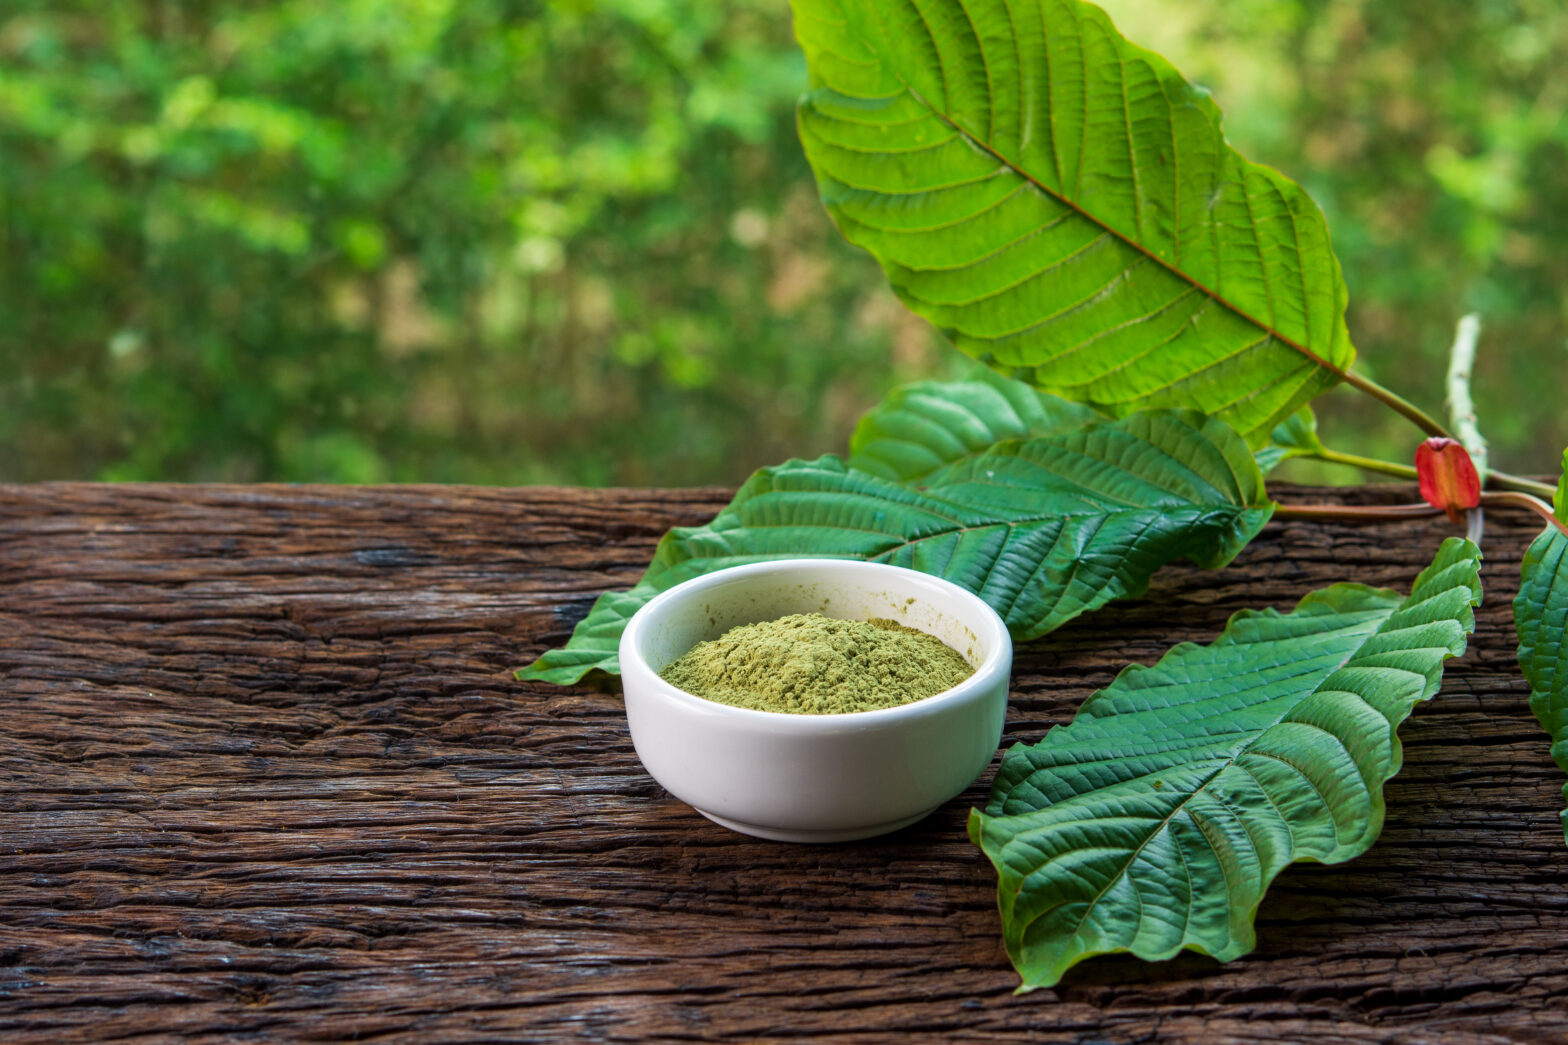 Kratom vs CBD - What's The Difference?